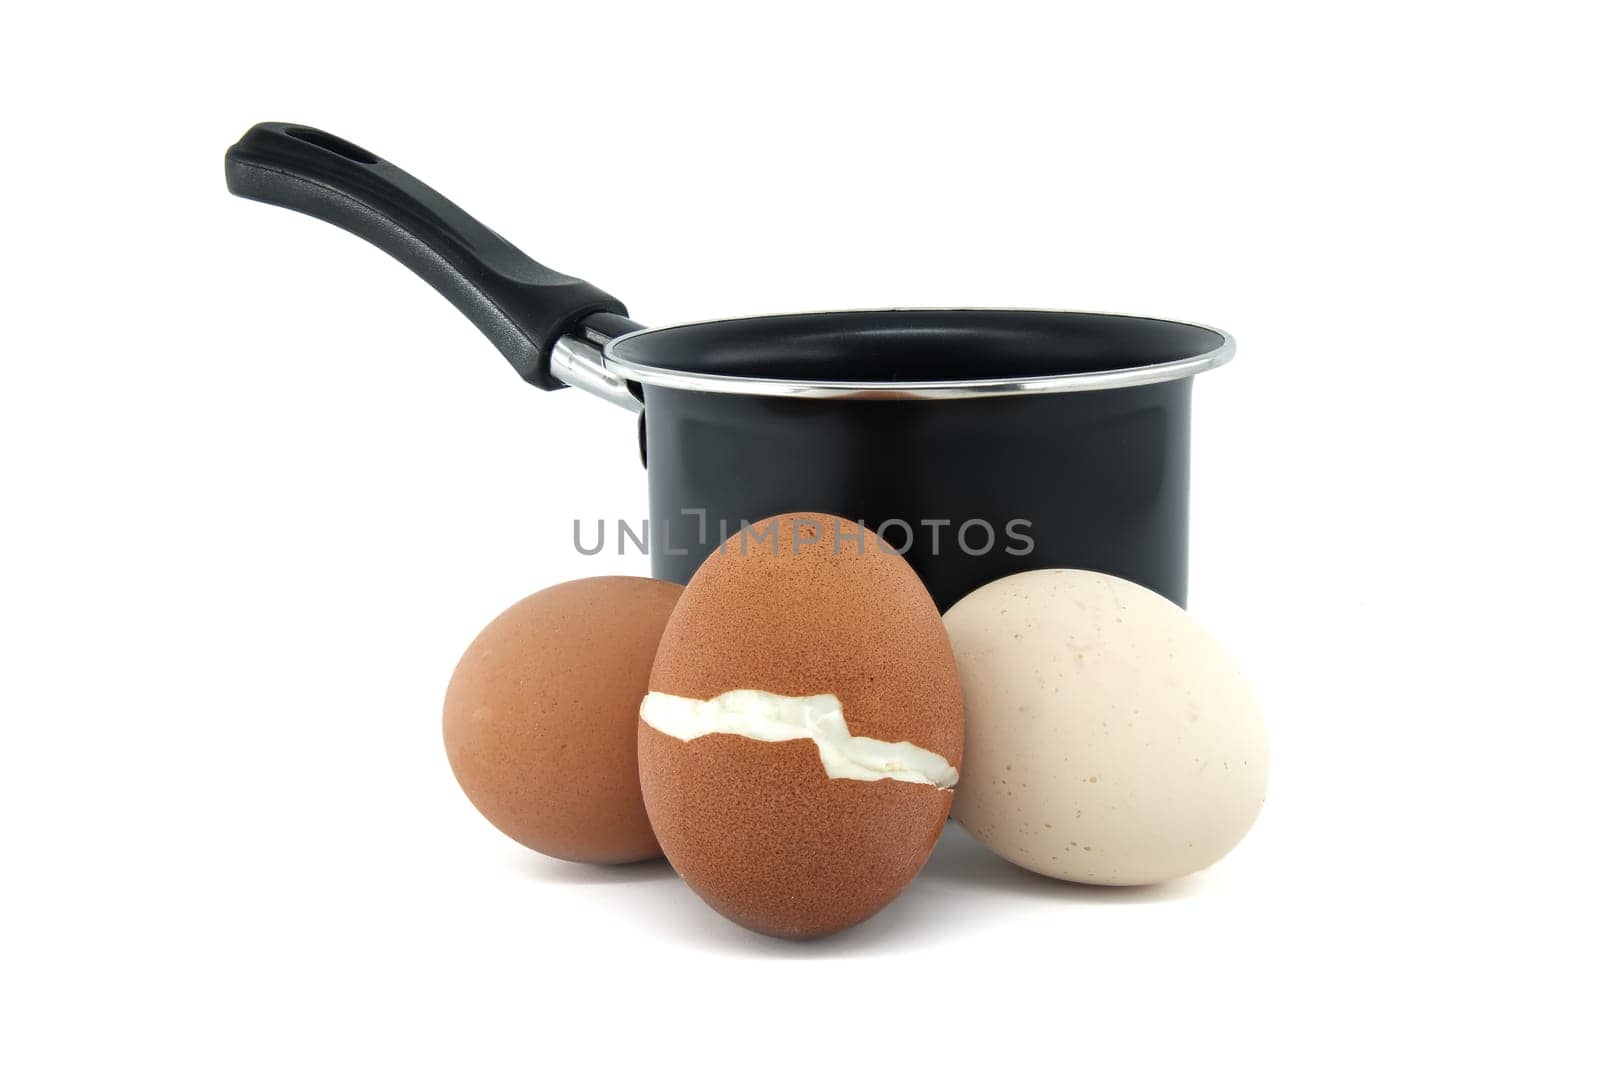 Black cooking pot surrounding collection of eggs with varying colors, one egg has cracked during boiling, isolated on white background